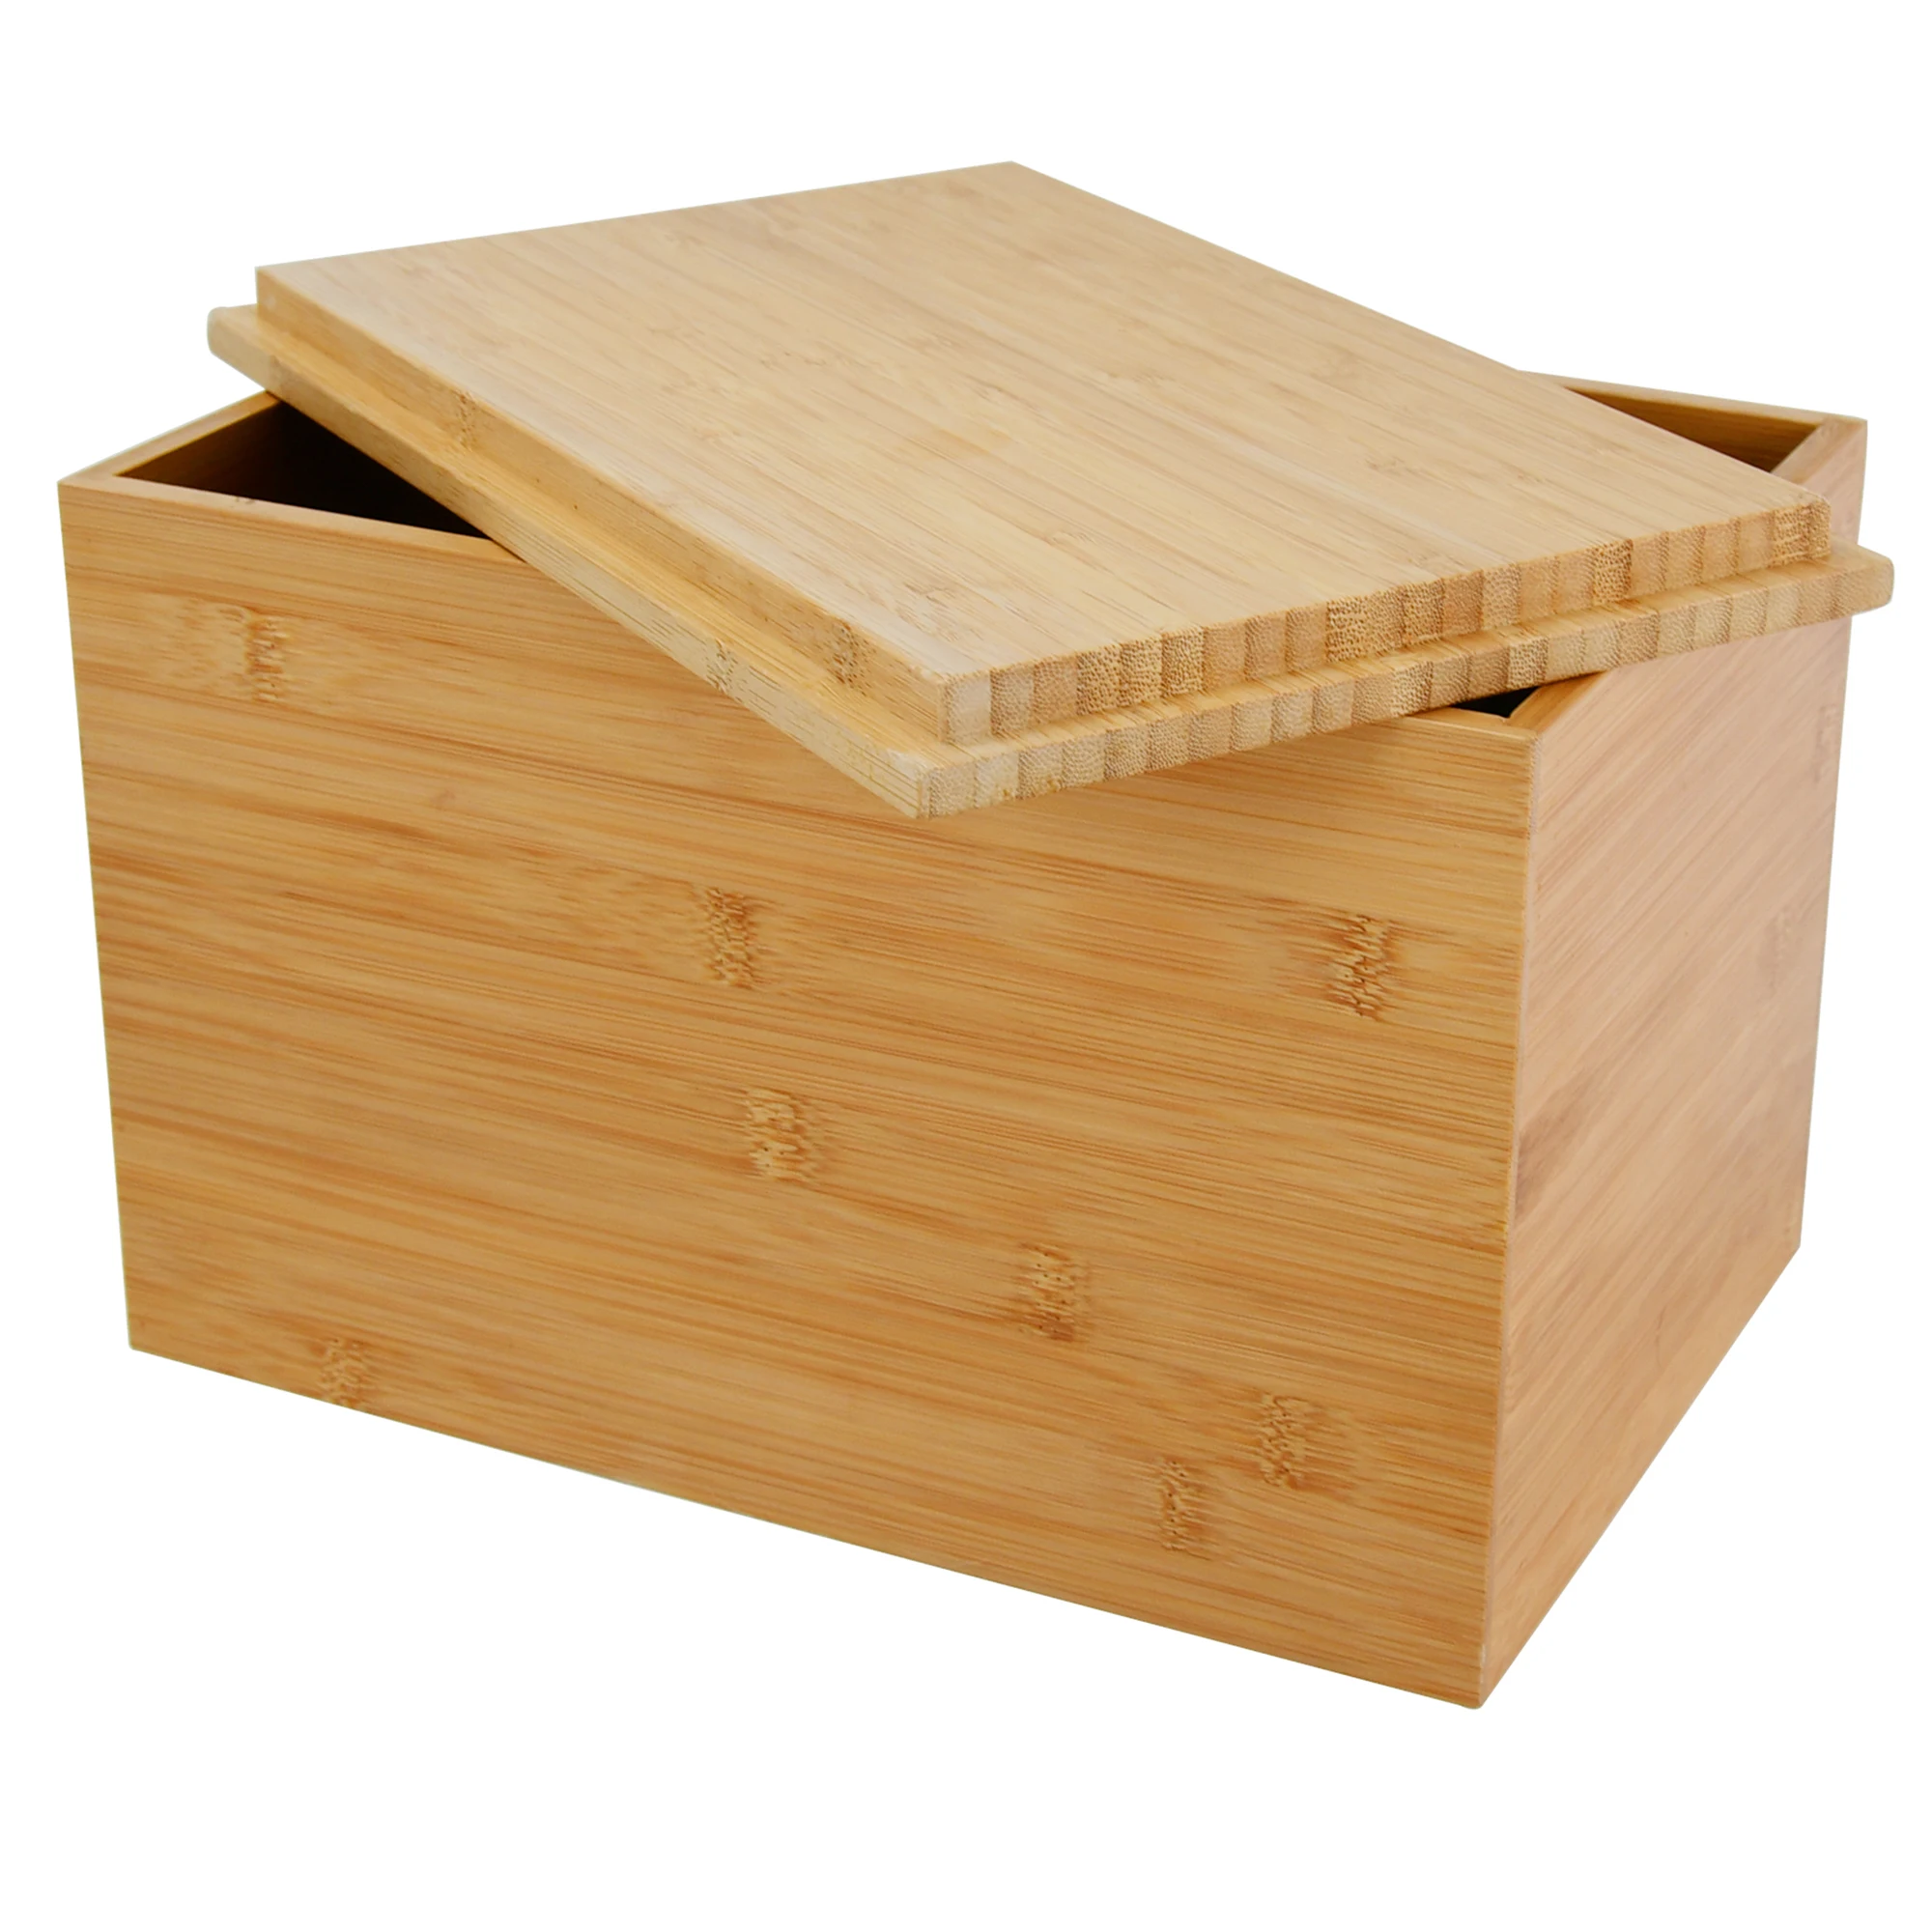 Extra Large Bread Box Modern Farmhouse With Cutting Board For Kitchen Counter Big Air Vents To Keep Bread Fresh